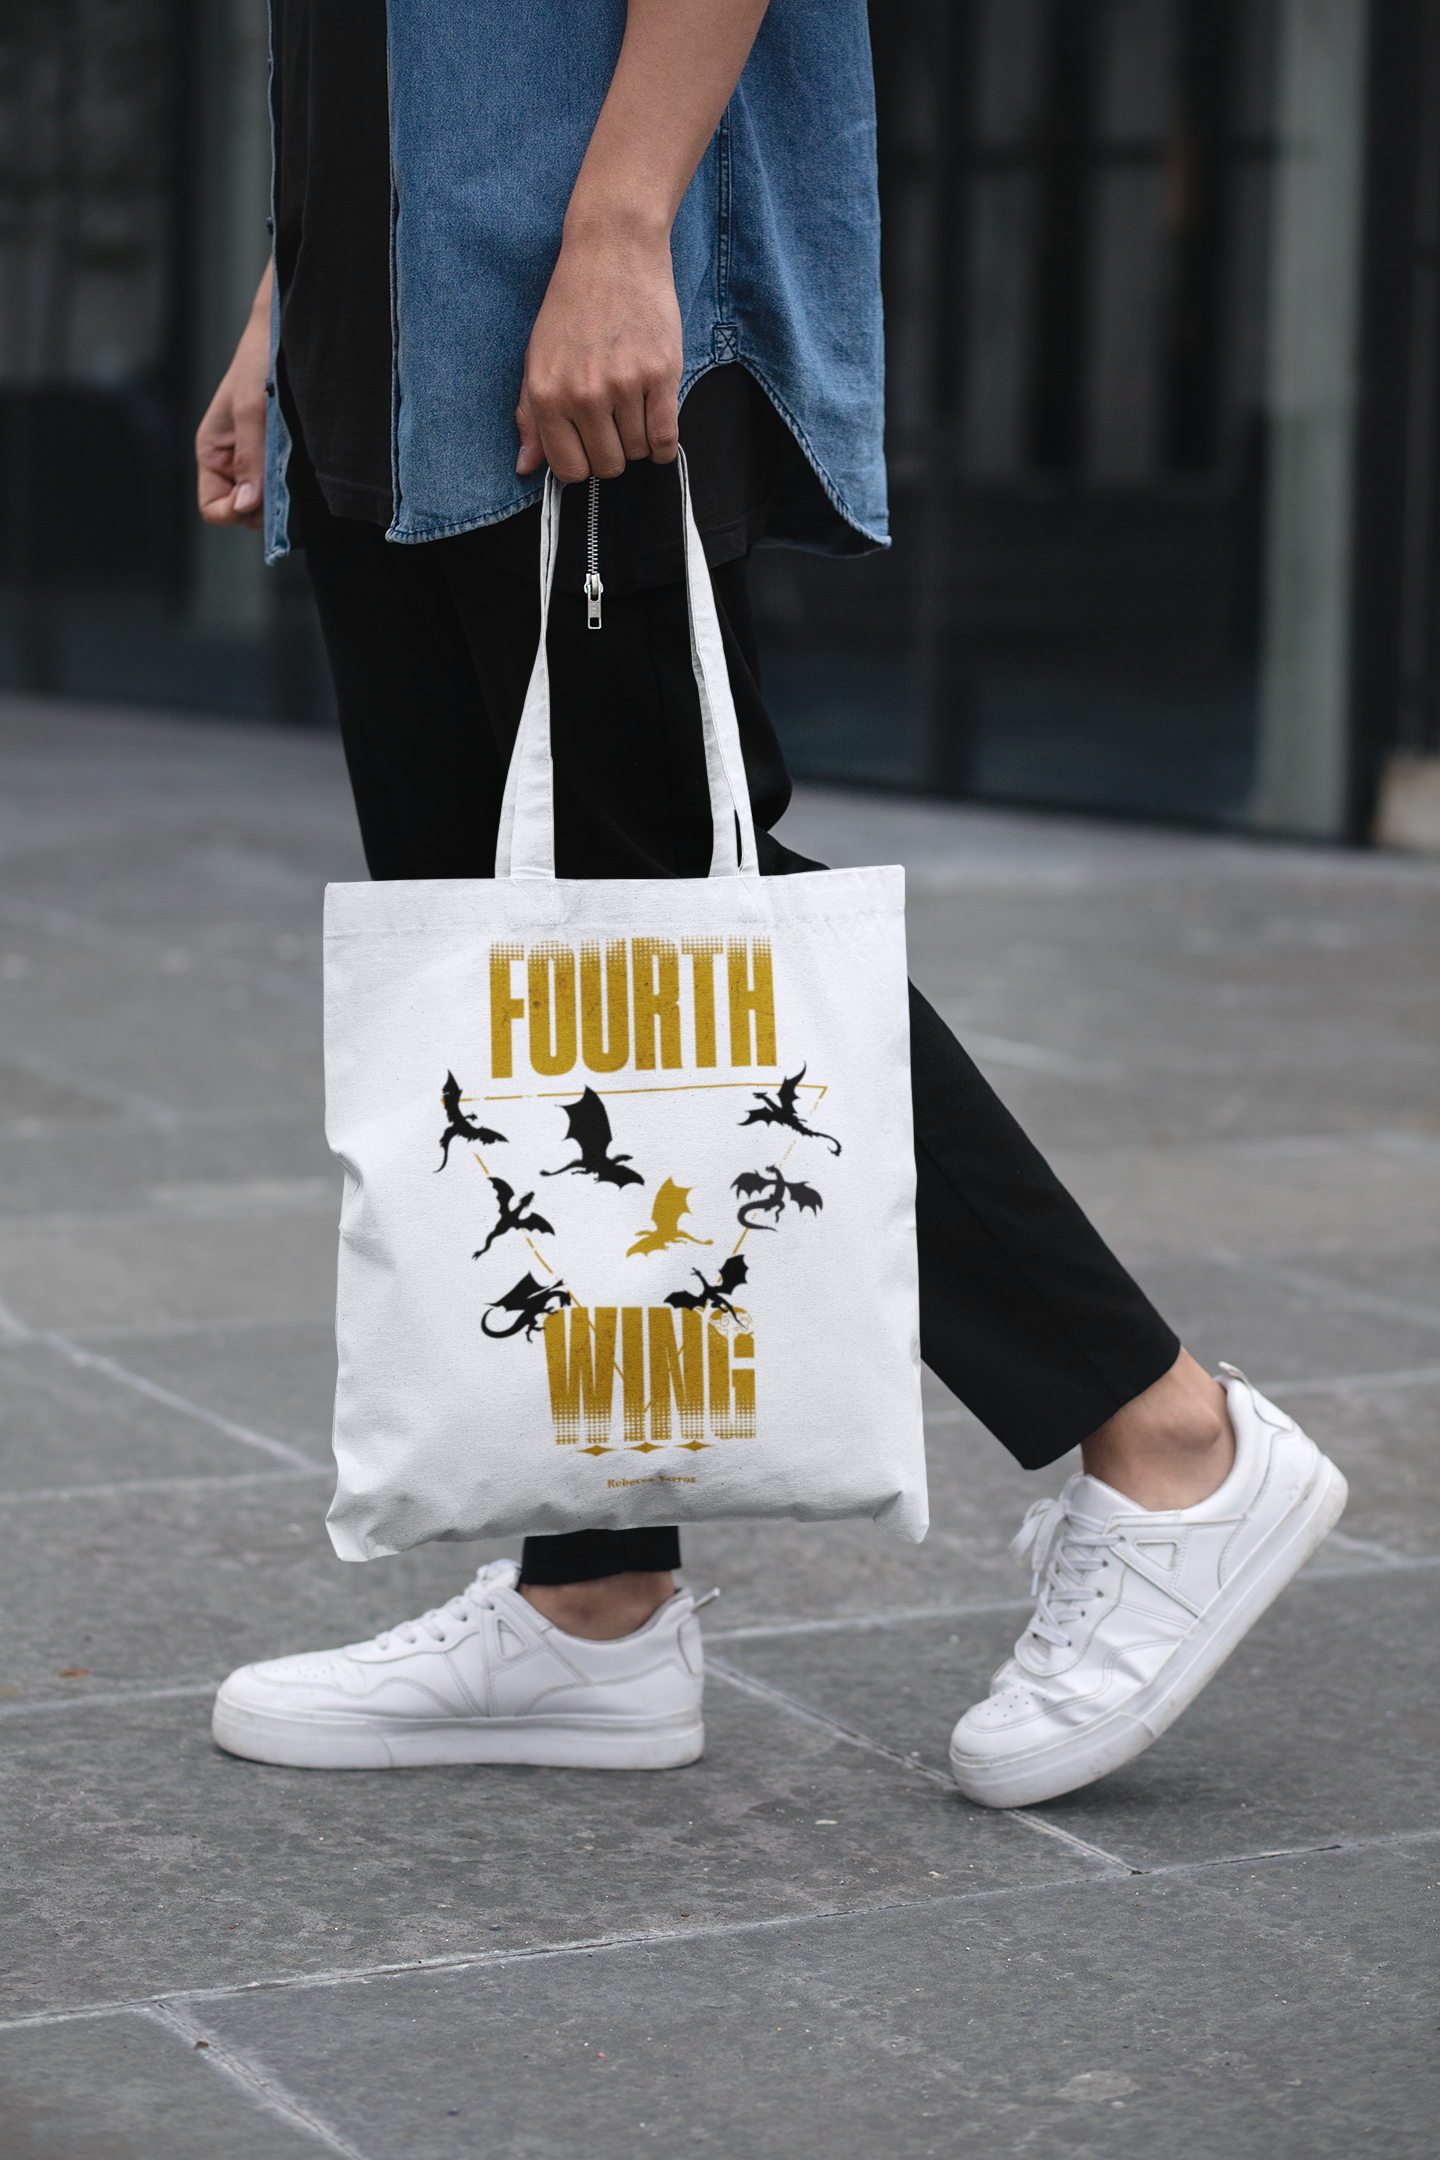 Fourth Wing Tote - Fourth Wing - Rebecca Yarros - Officially Licensed